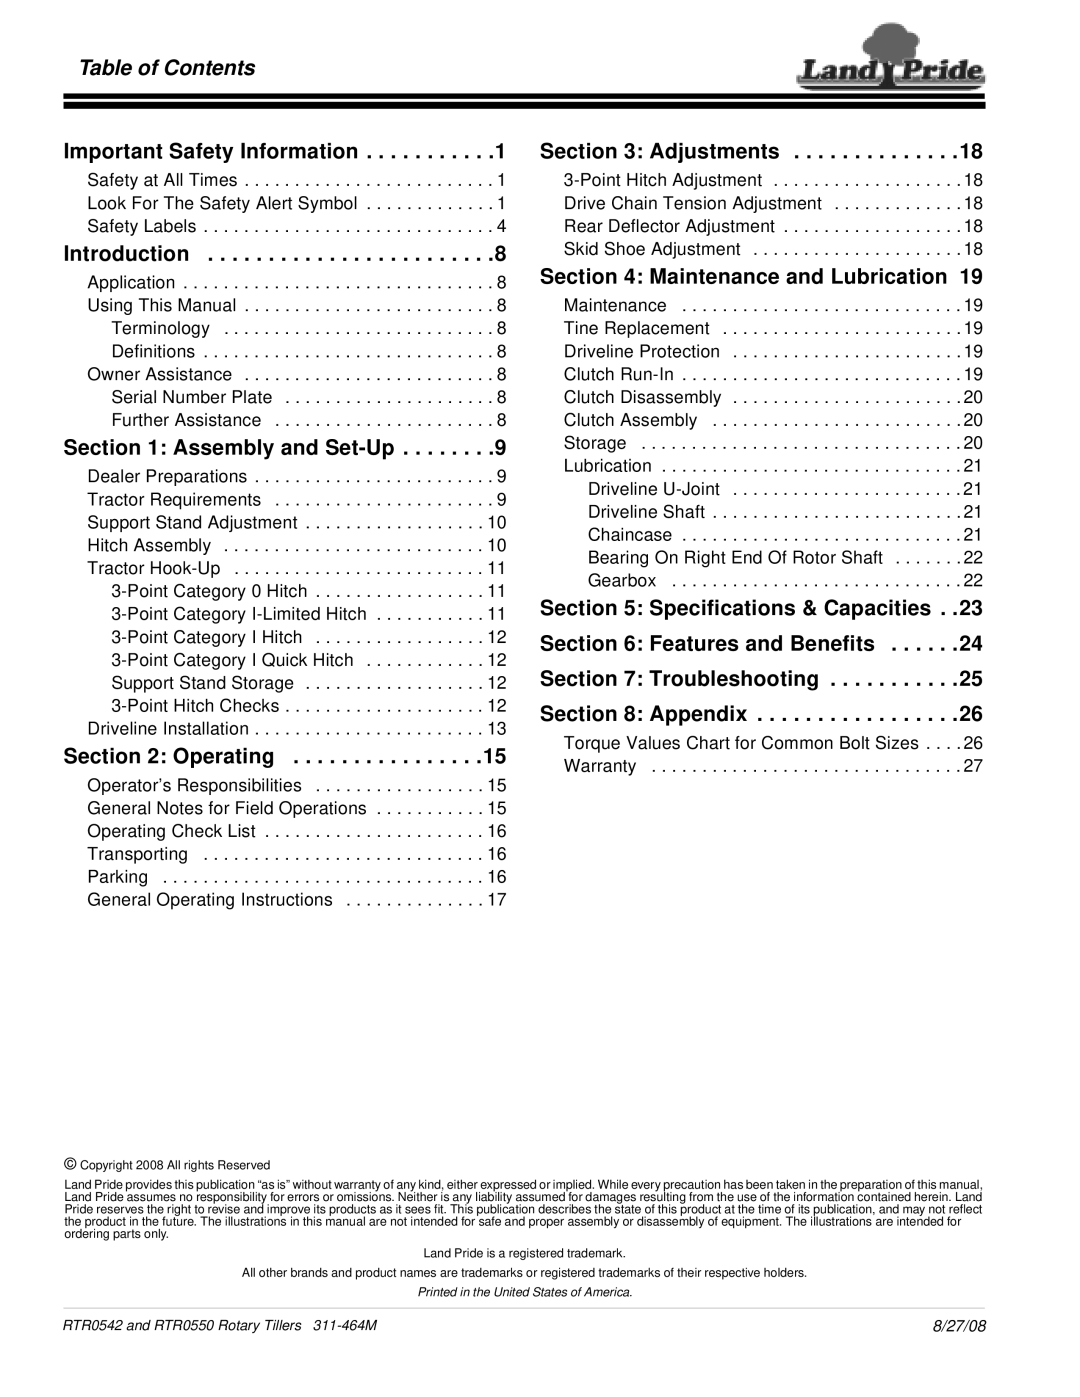 Land Pride RTR0542, RTR0550 manual Table of Contents 